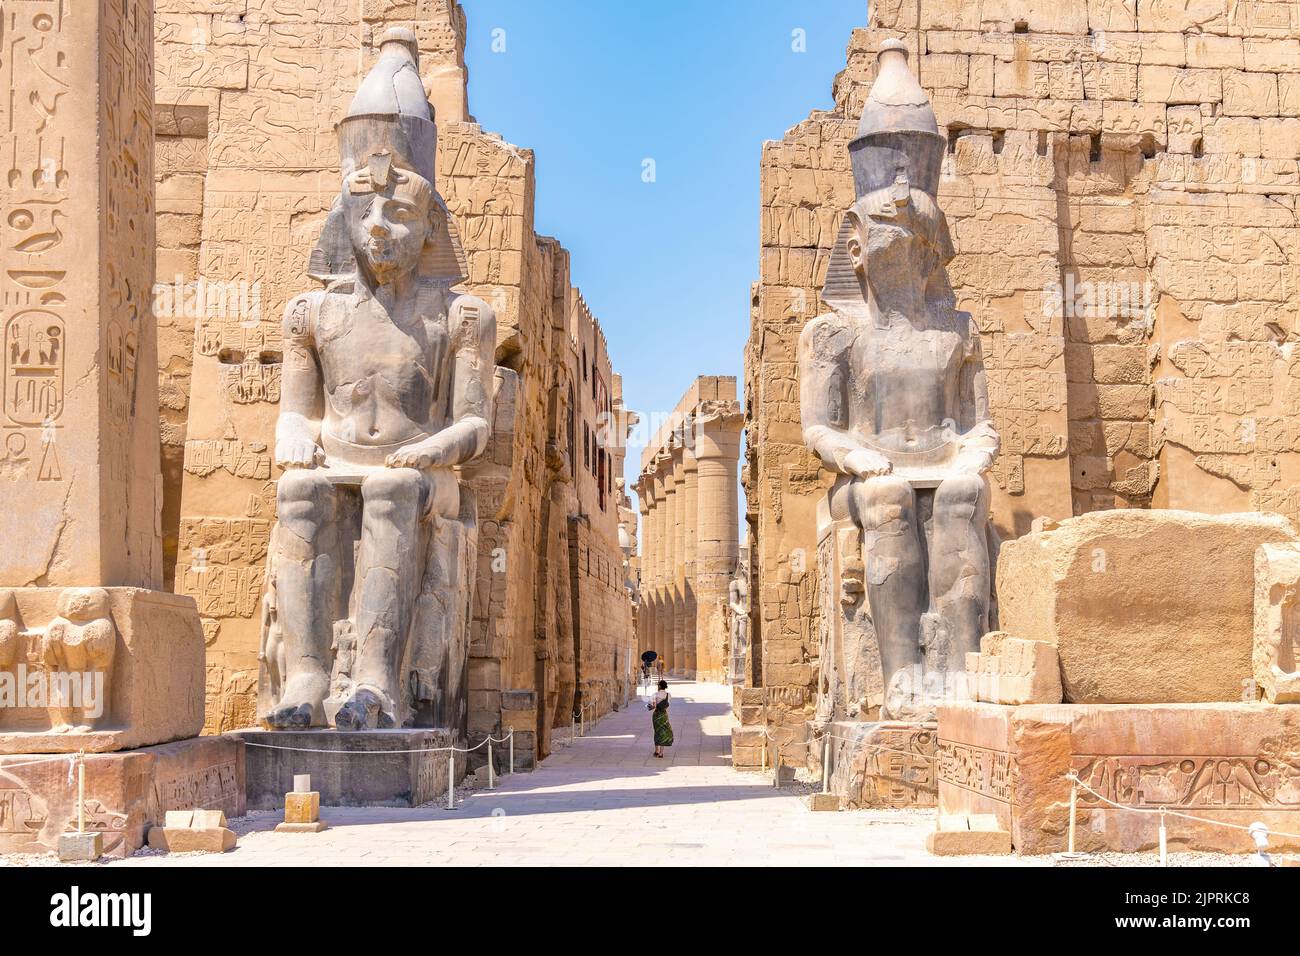 Luxor, Egypt; August 17, 2022 - A vistor entering the entrance  to the Luxor Temple in the middle of Luxor town, Egypt. Stock Photo